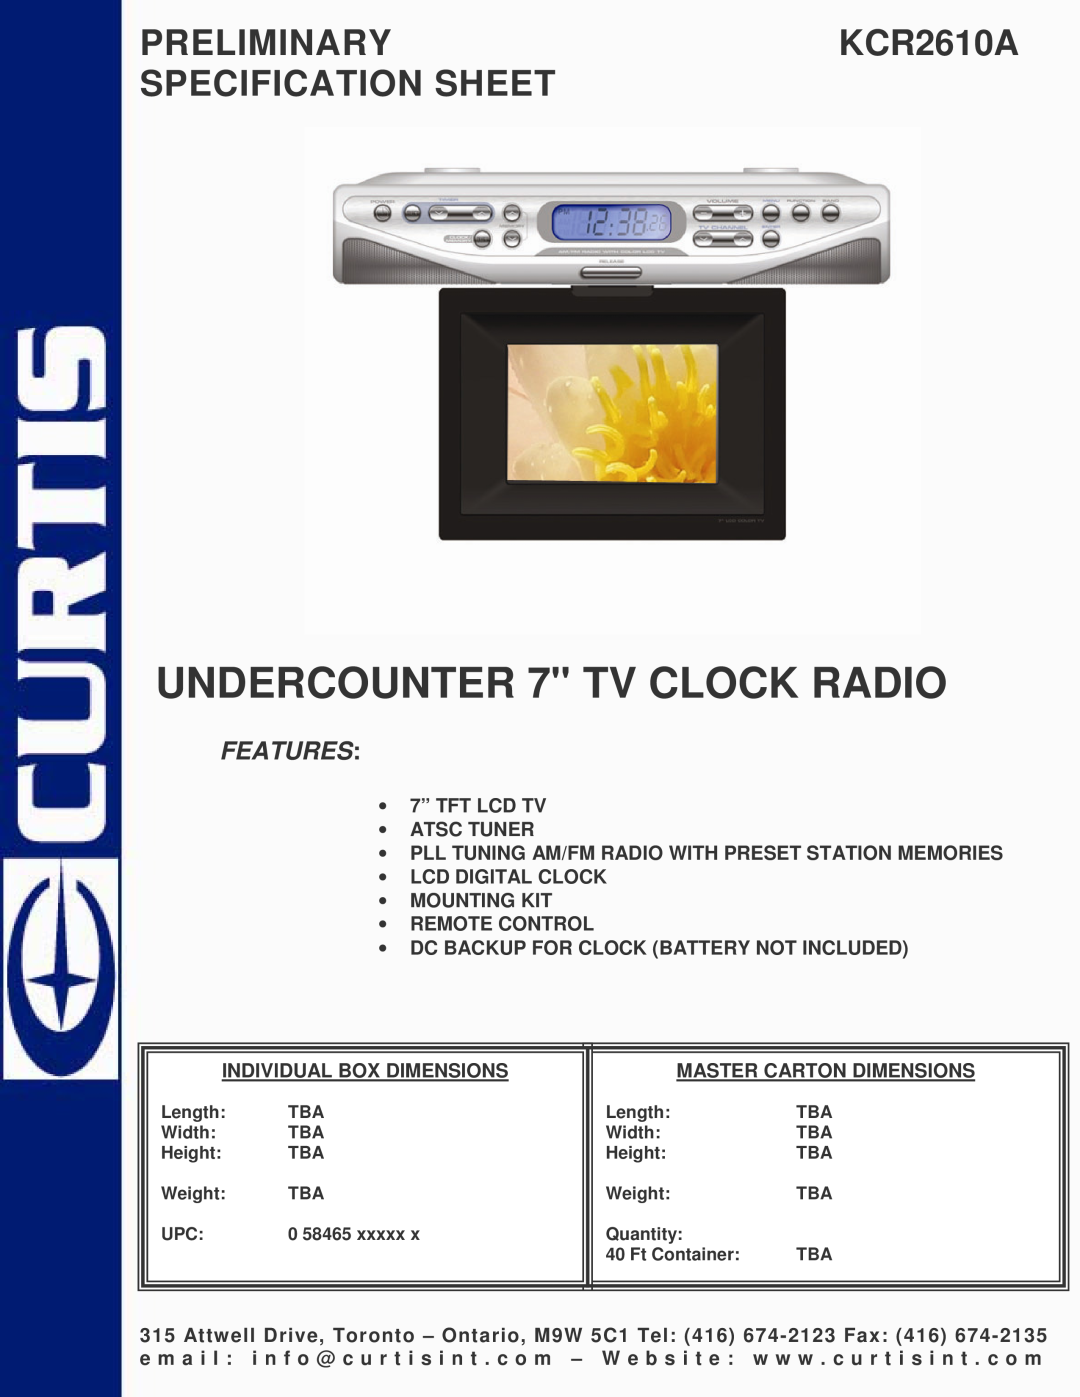 Curtis specifications UNDERCOUNTER 7 TV CLOCK RADIO, PRELIMINARYKCR2610A SPECIFICATION SHEET, Features 